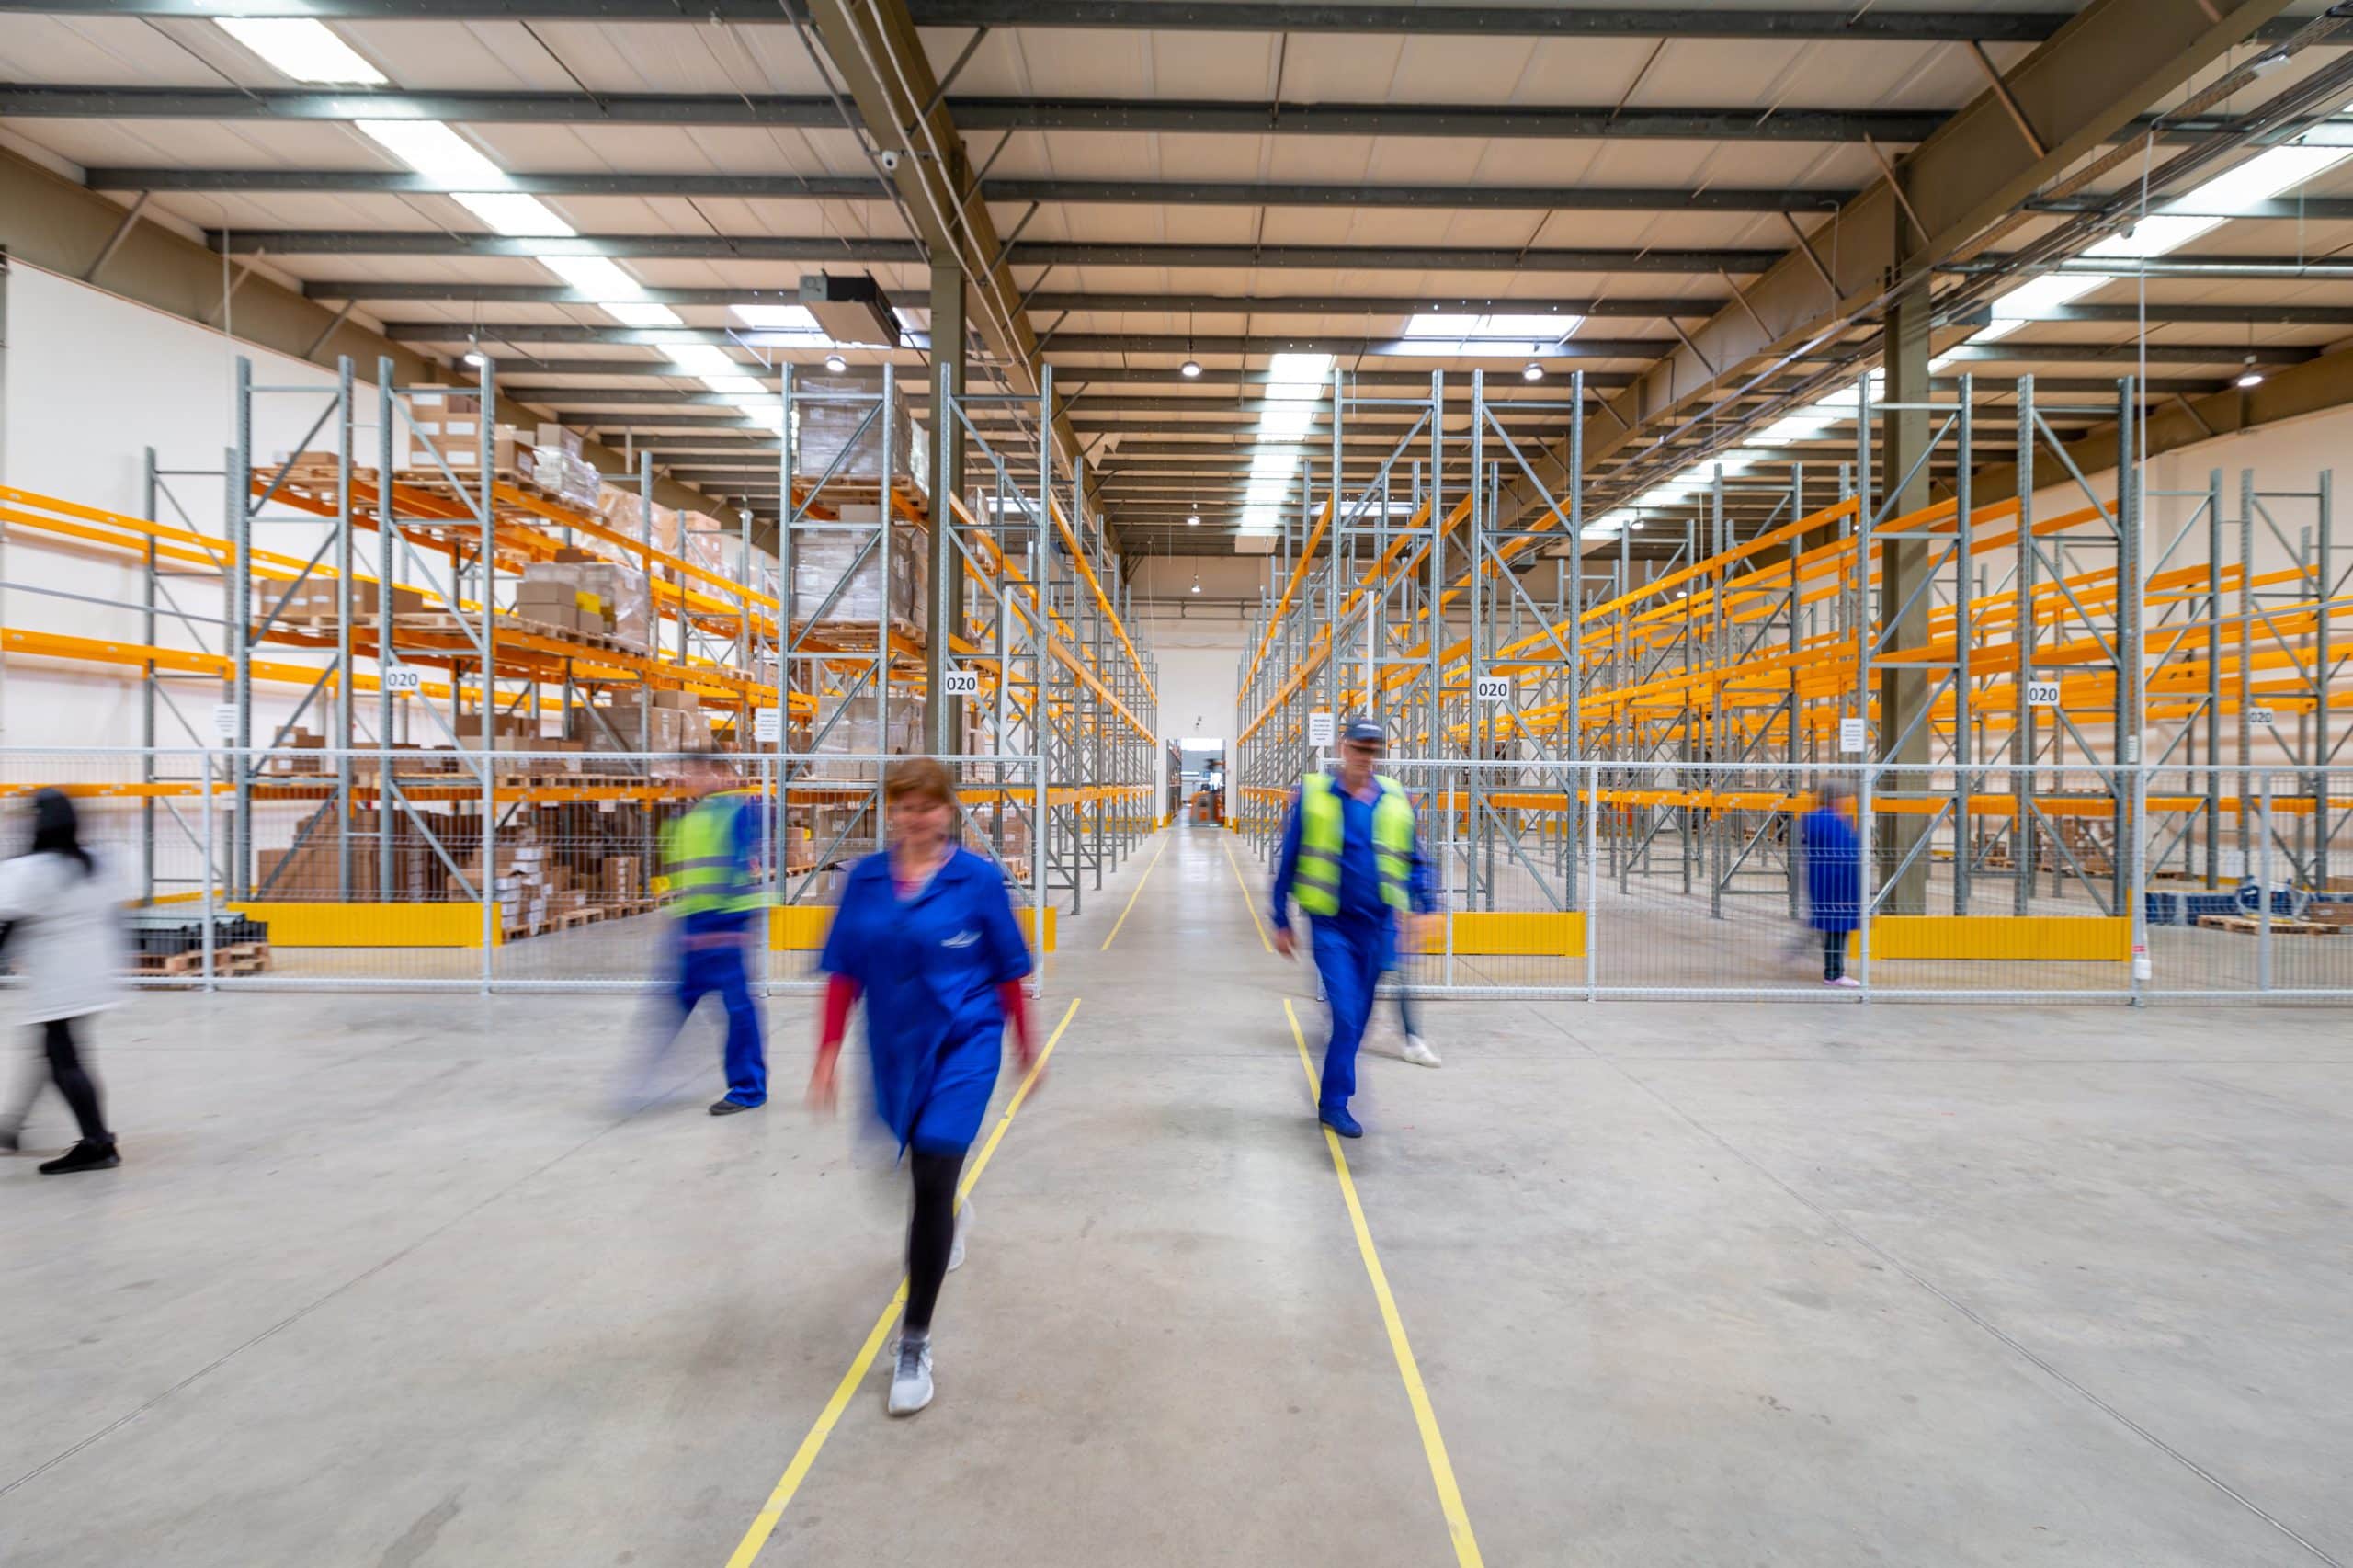 Generic warehouse with warehousers workers dressed in blue, workers are blurred to emulate fast pace and busyness